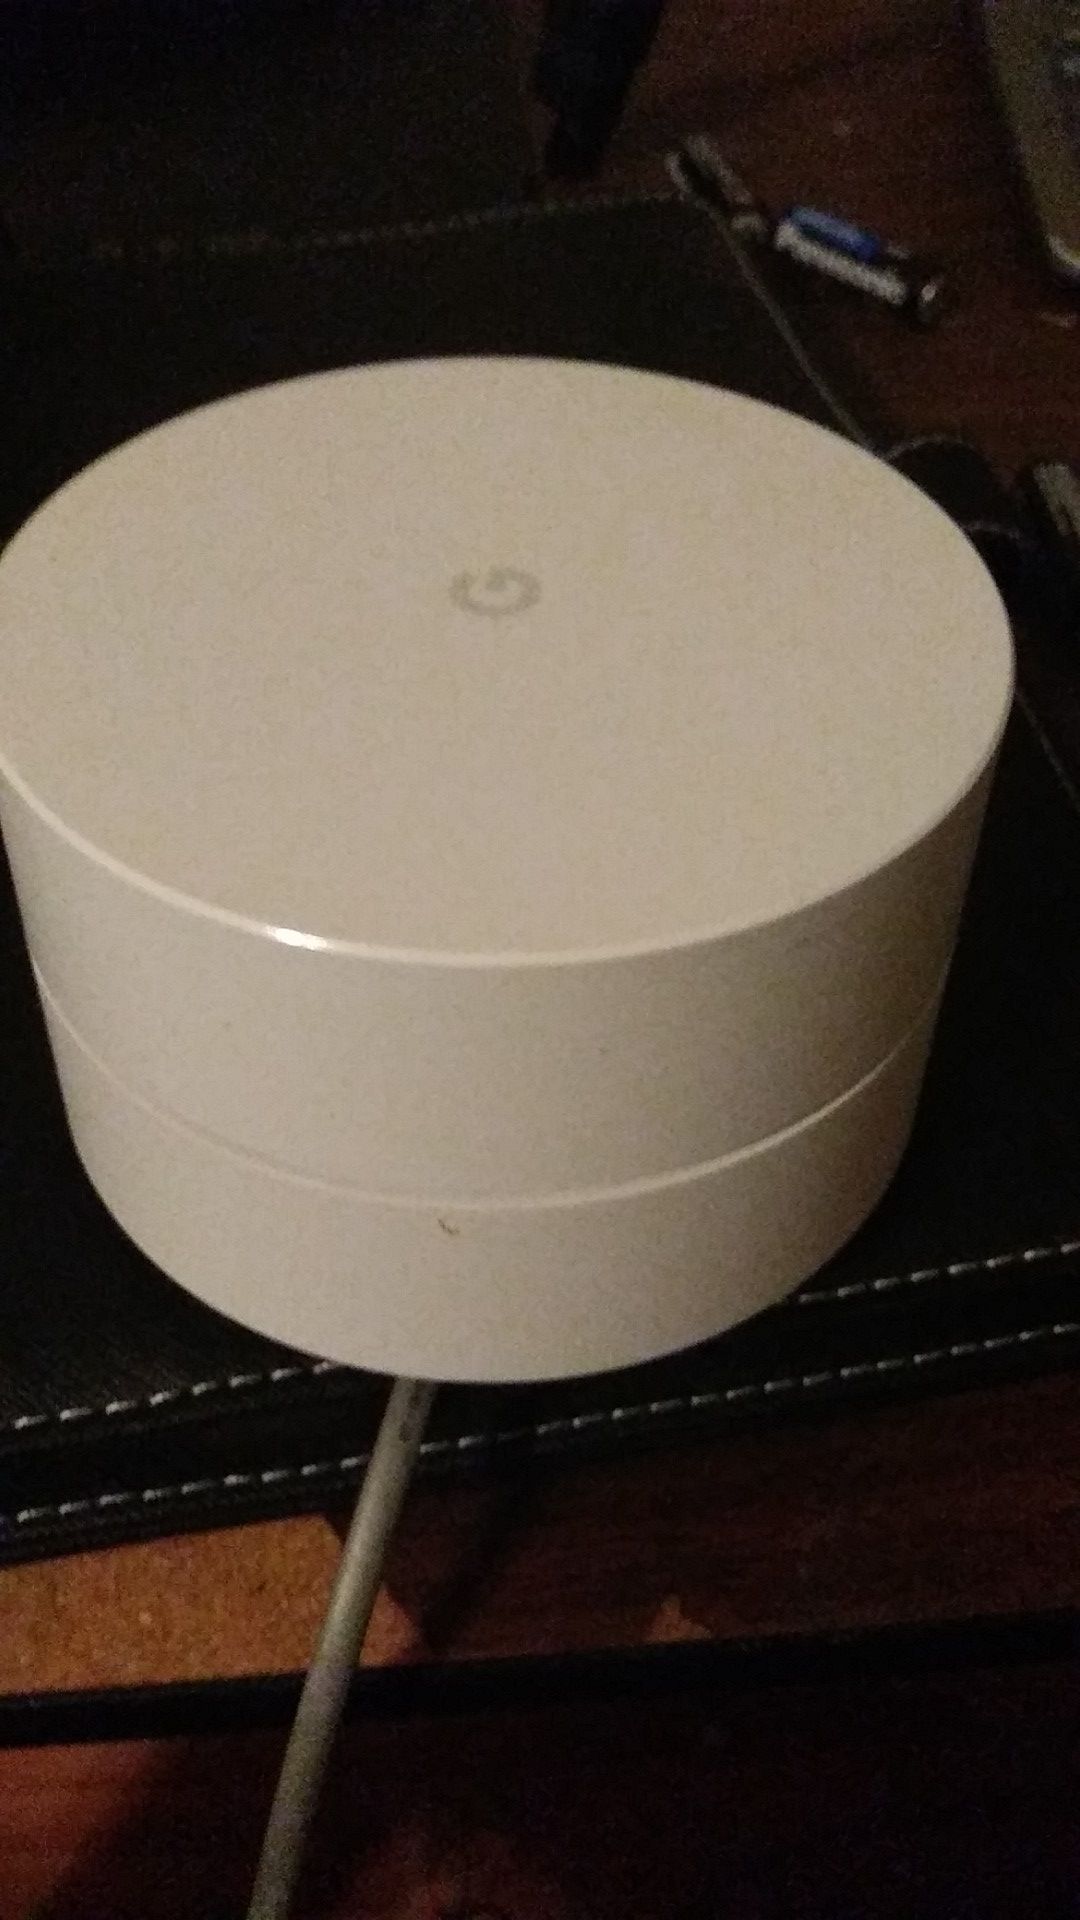 Google Router 3way Mes ohh..Dome. Have an Ethernet Cord.